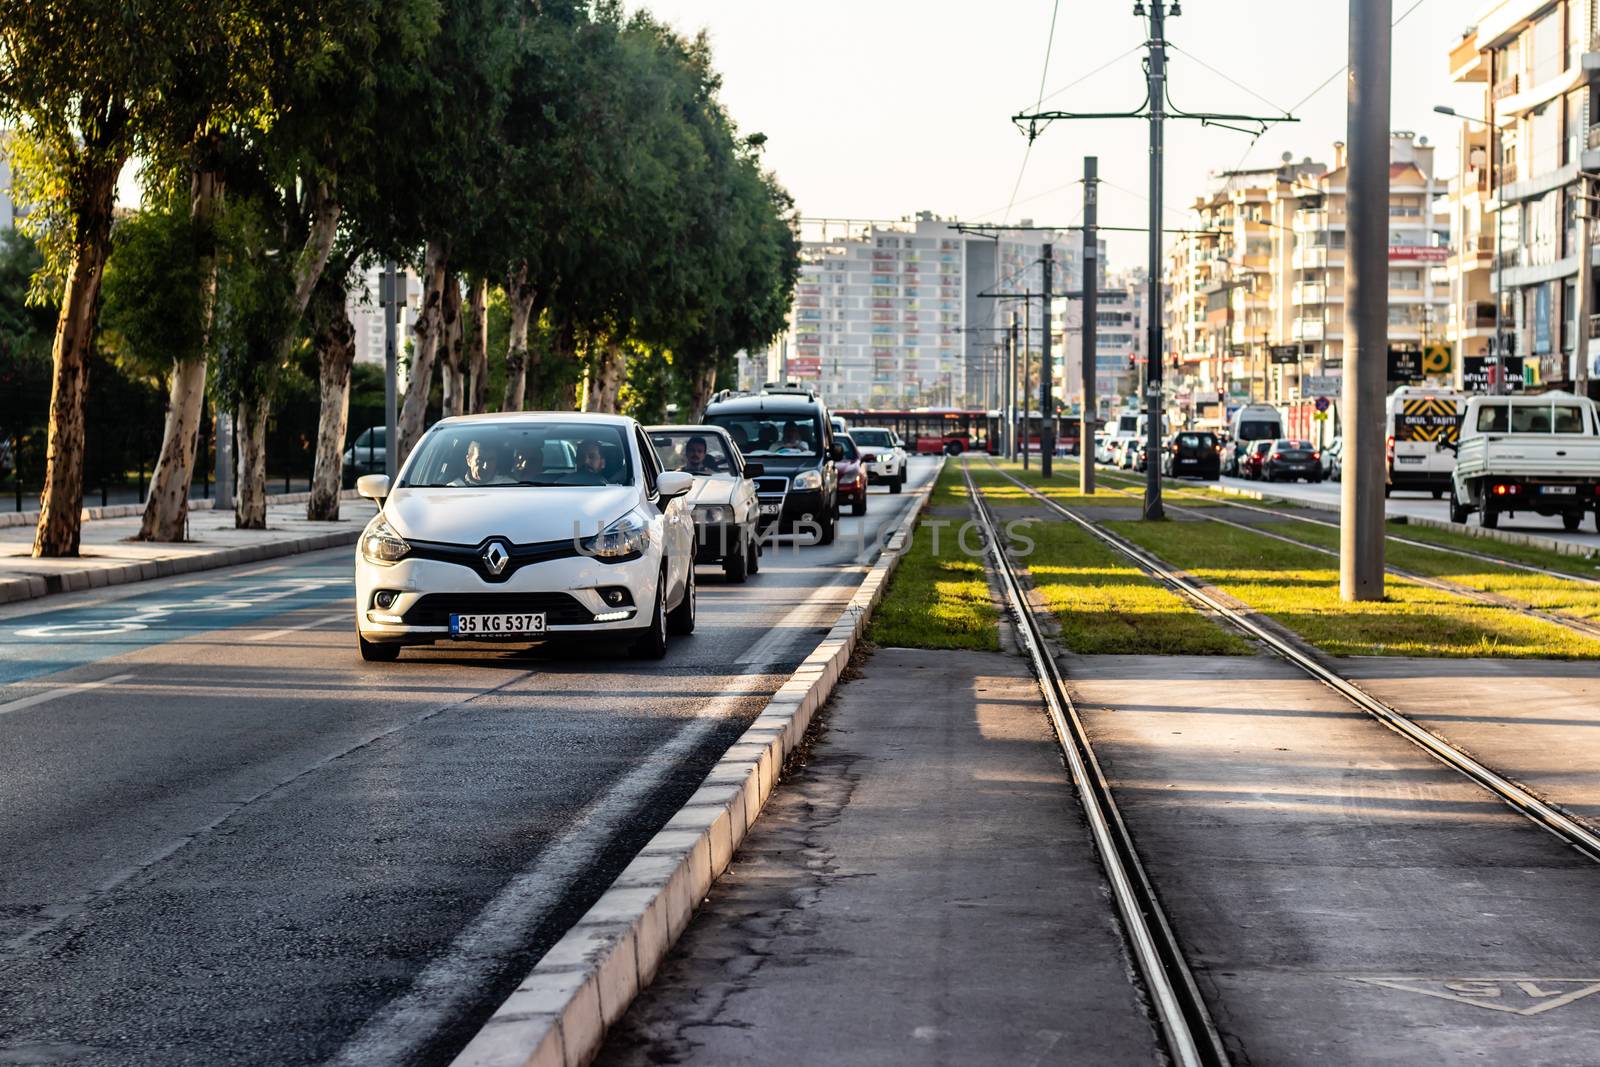 good looking wide cityscape shoot from turkey - there is cars and rails for tramway. photo has taken at izmir/turkey.